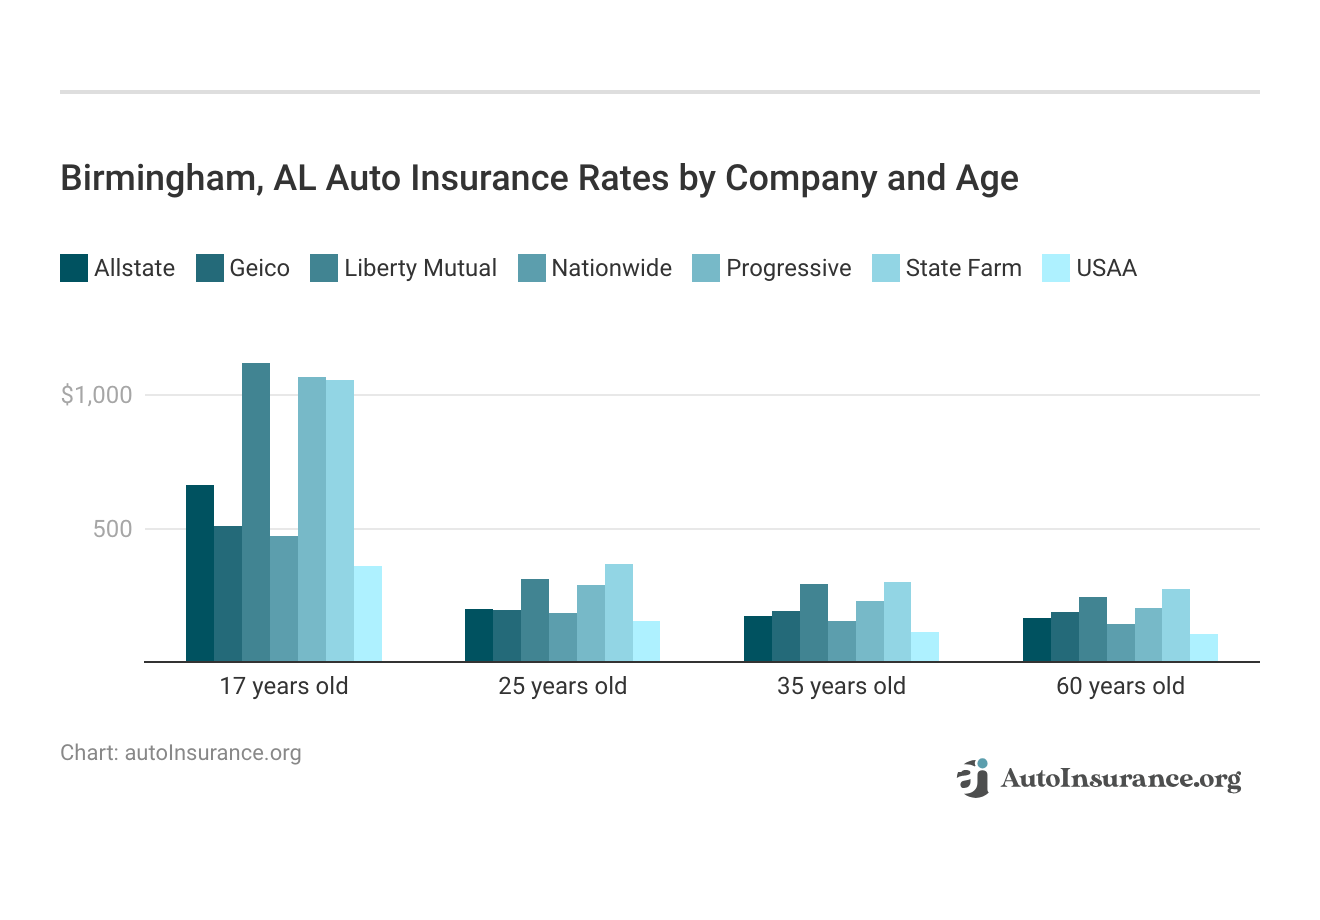 <h3>Birmingham, AL Auto Insurance Rates by Company and Age</h3>